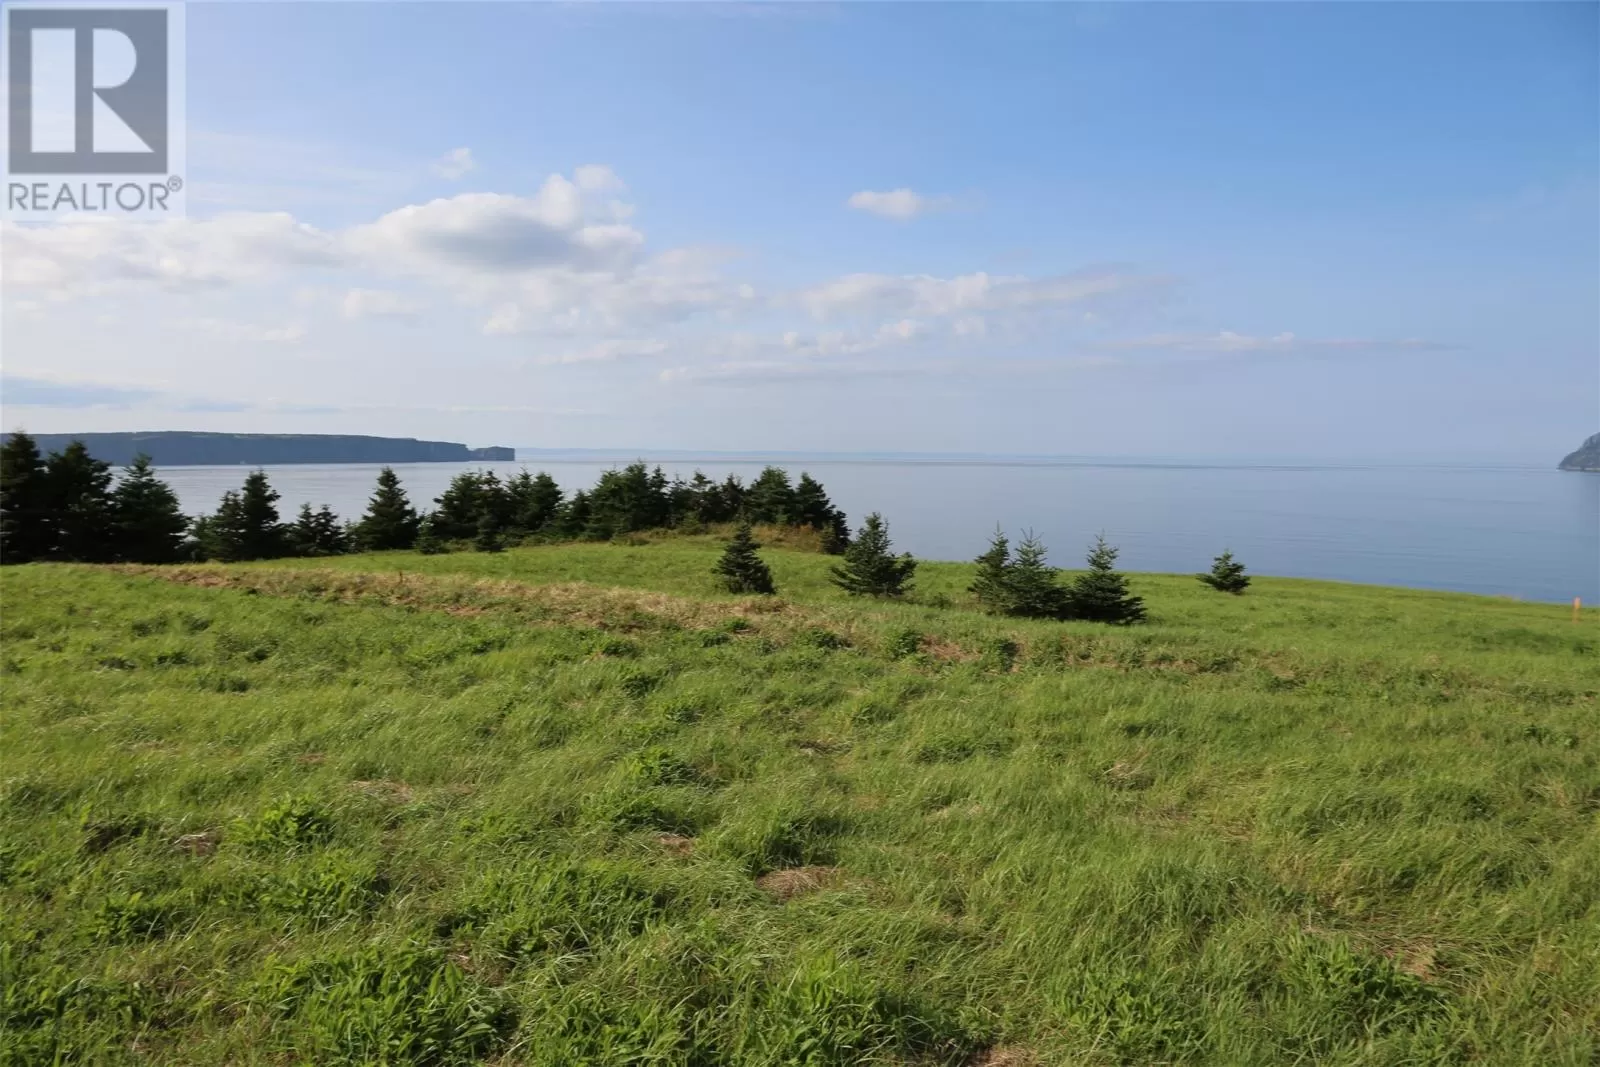 40 West Point Road, Portugal Cove - St. Philips, Newfoundland & Labrador A1M 2G8